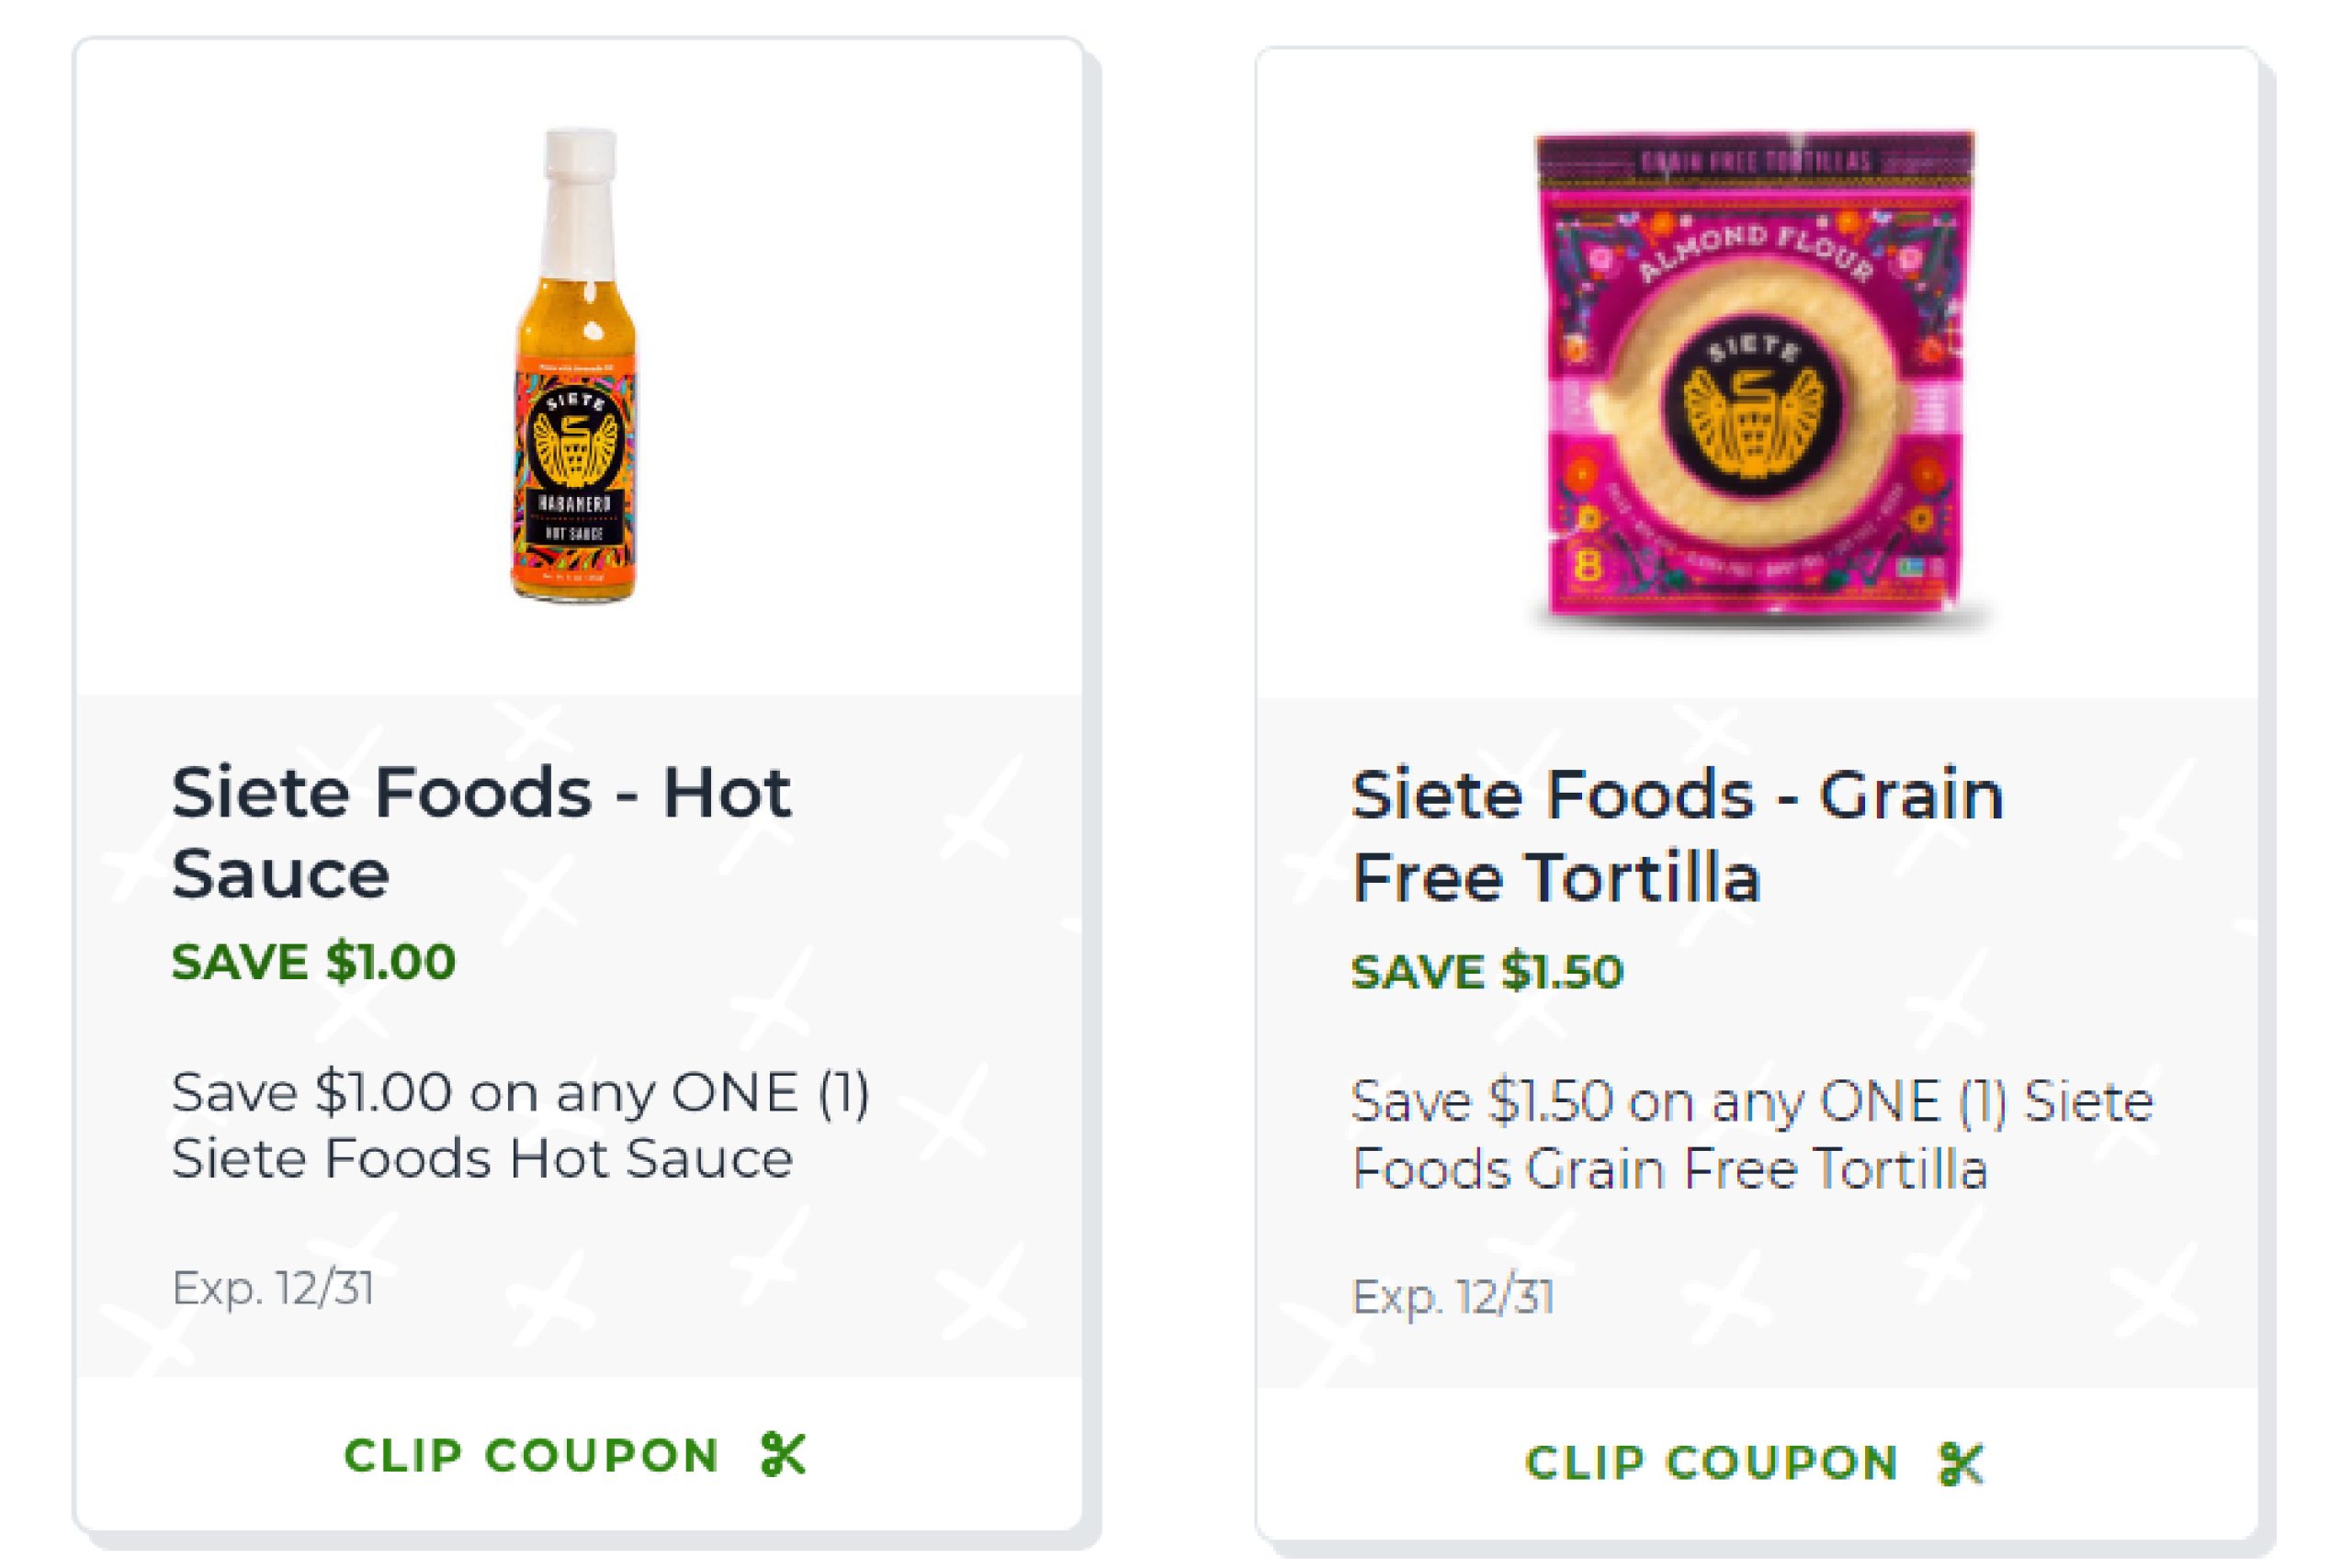 Baked Chipotle Chicken Quesadillas - Get Everything You Need At Publix & Save On Siete Hot Sauce & Tortillas on I Heart Publix